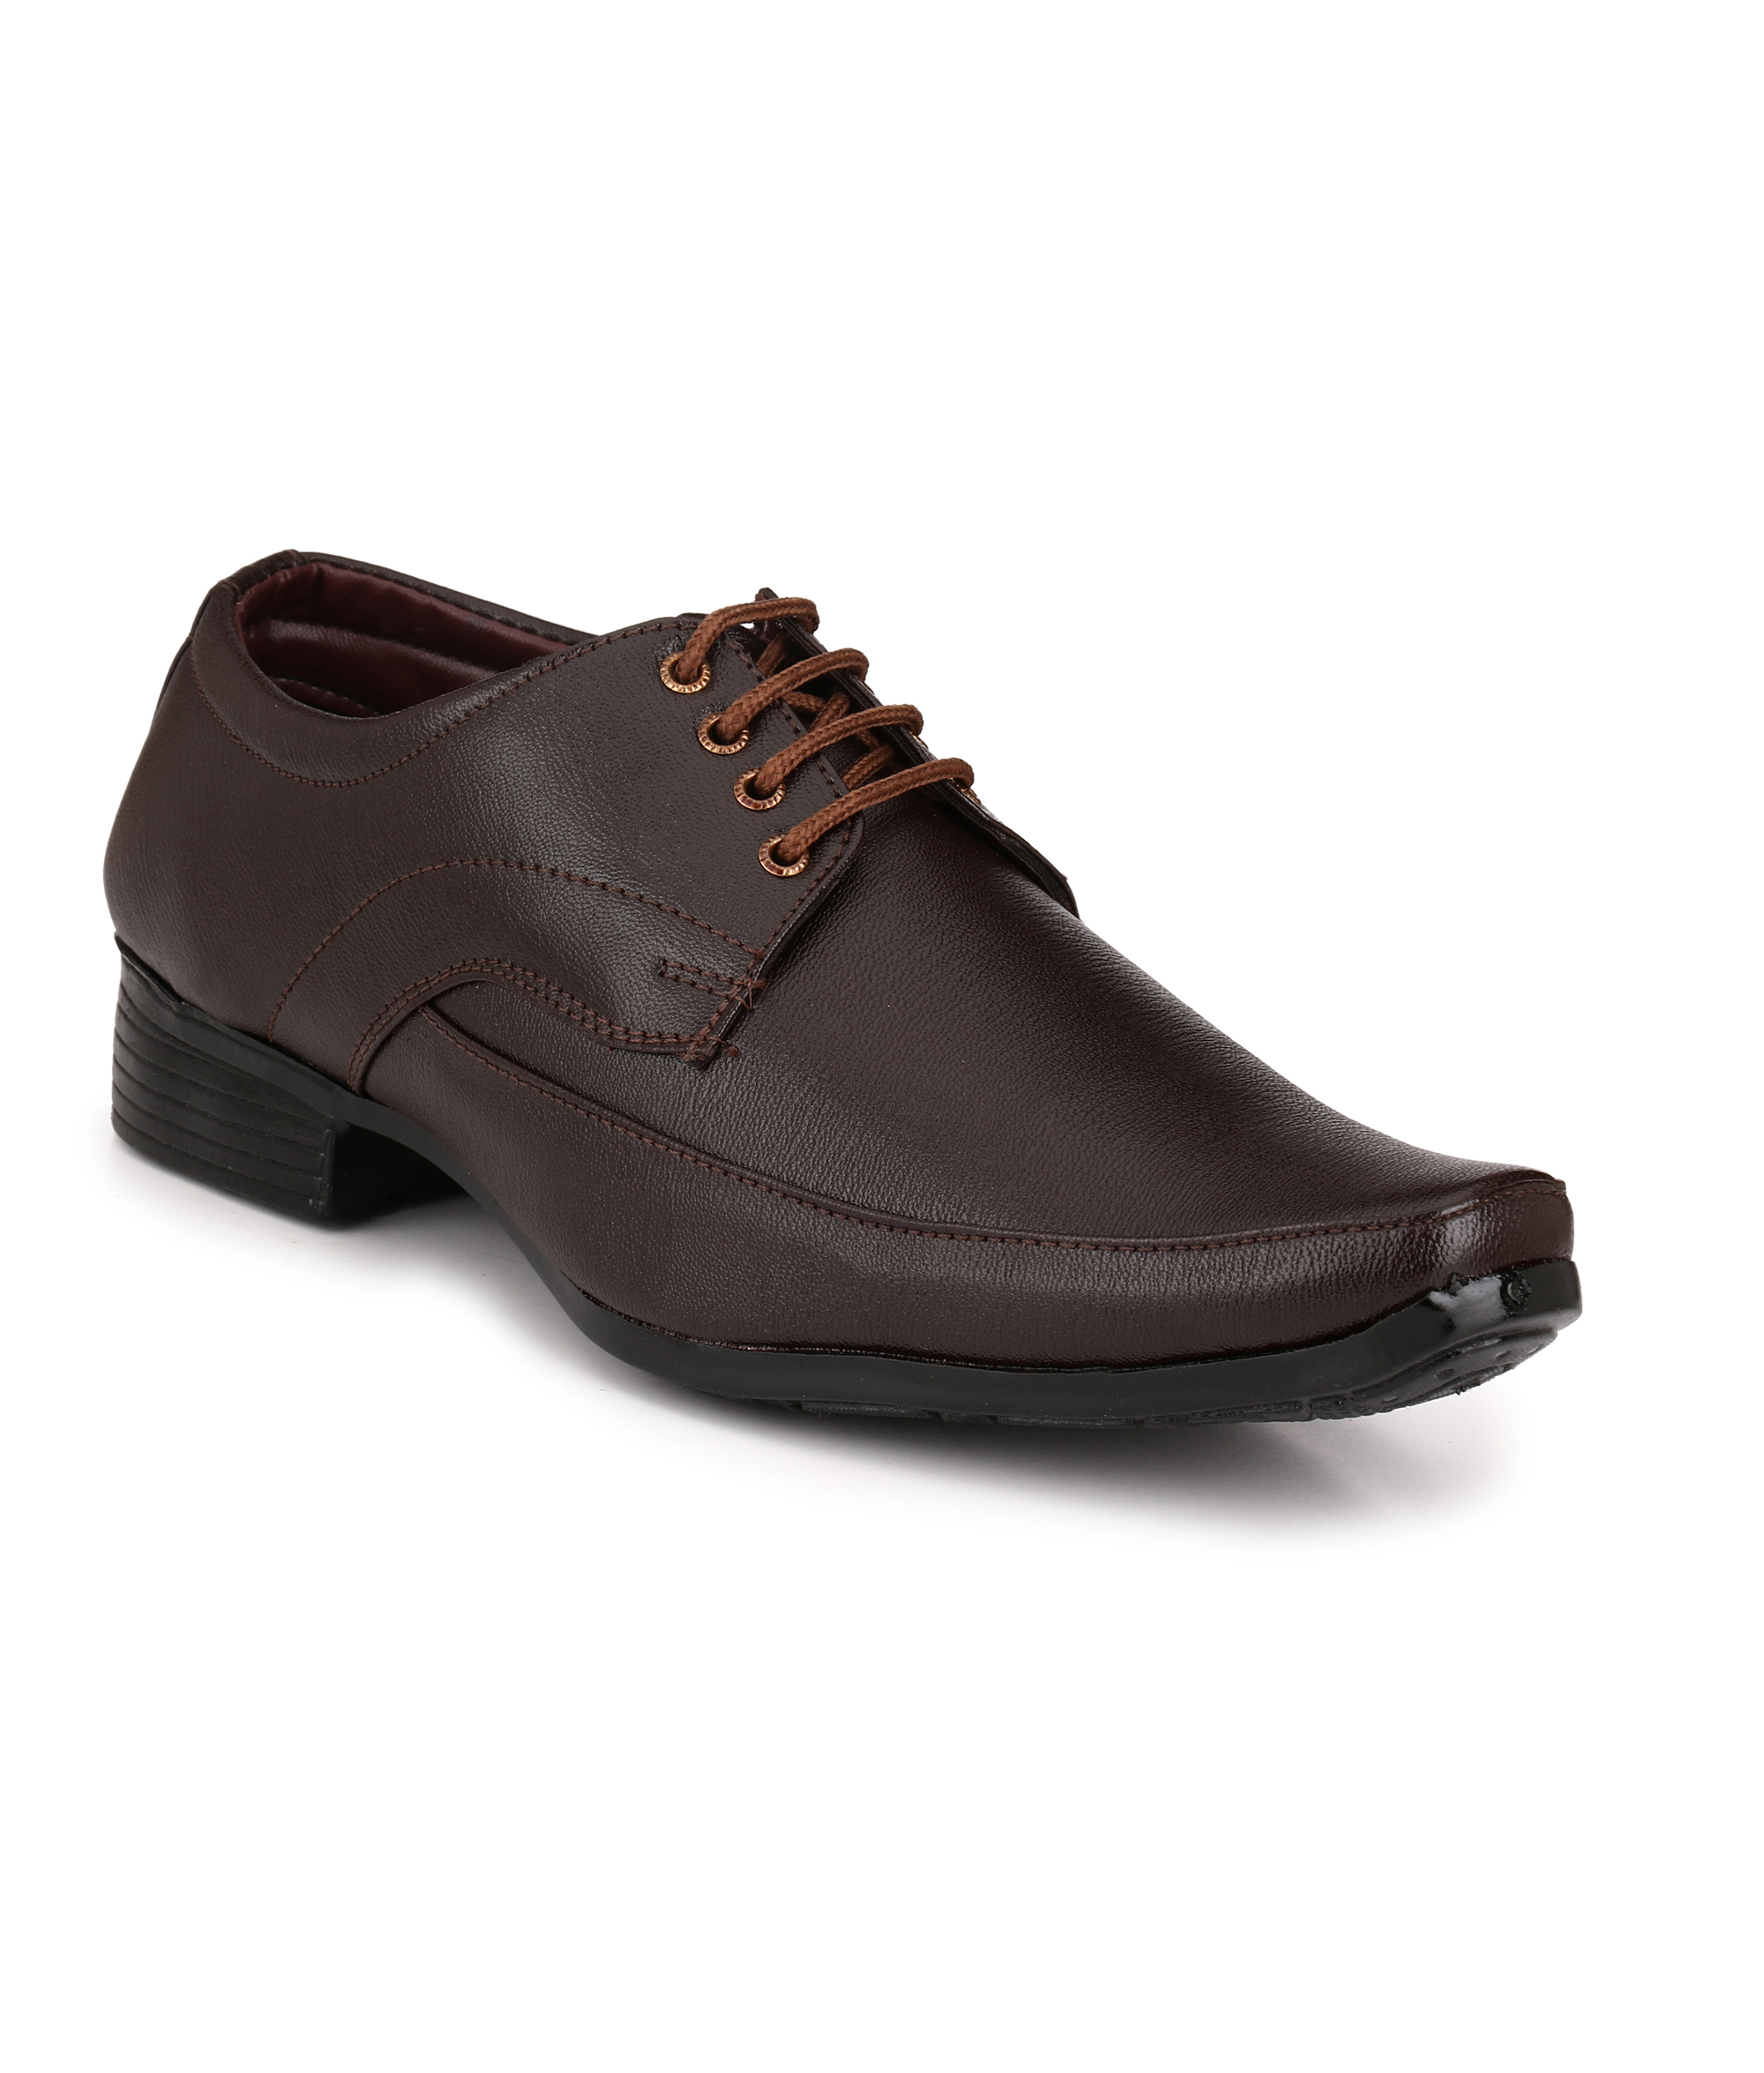 Buy Knoos Men Brown Lace-Up Formal Shoes Online @ ₹599 from ShopClues